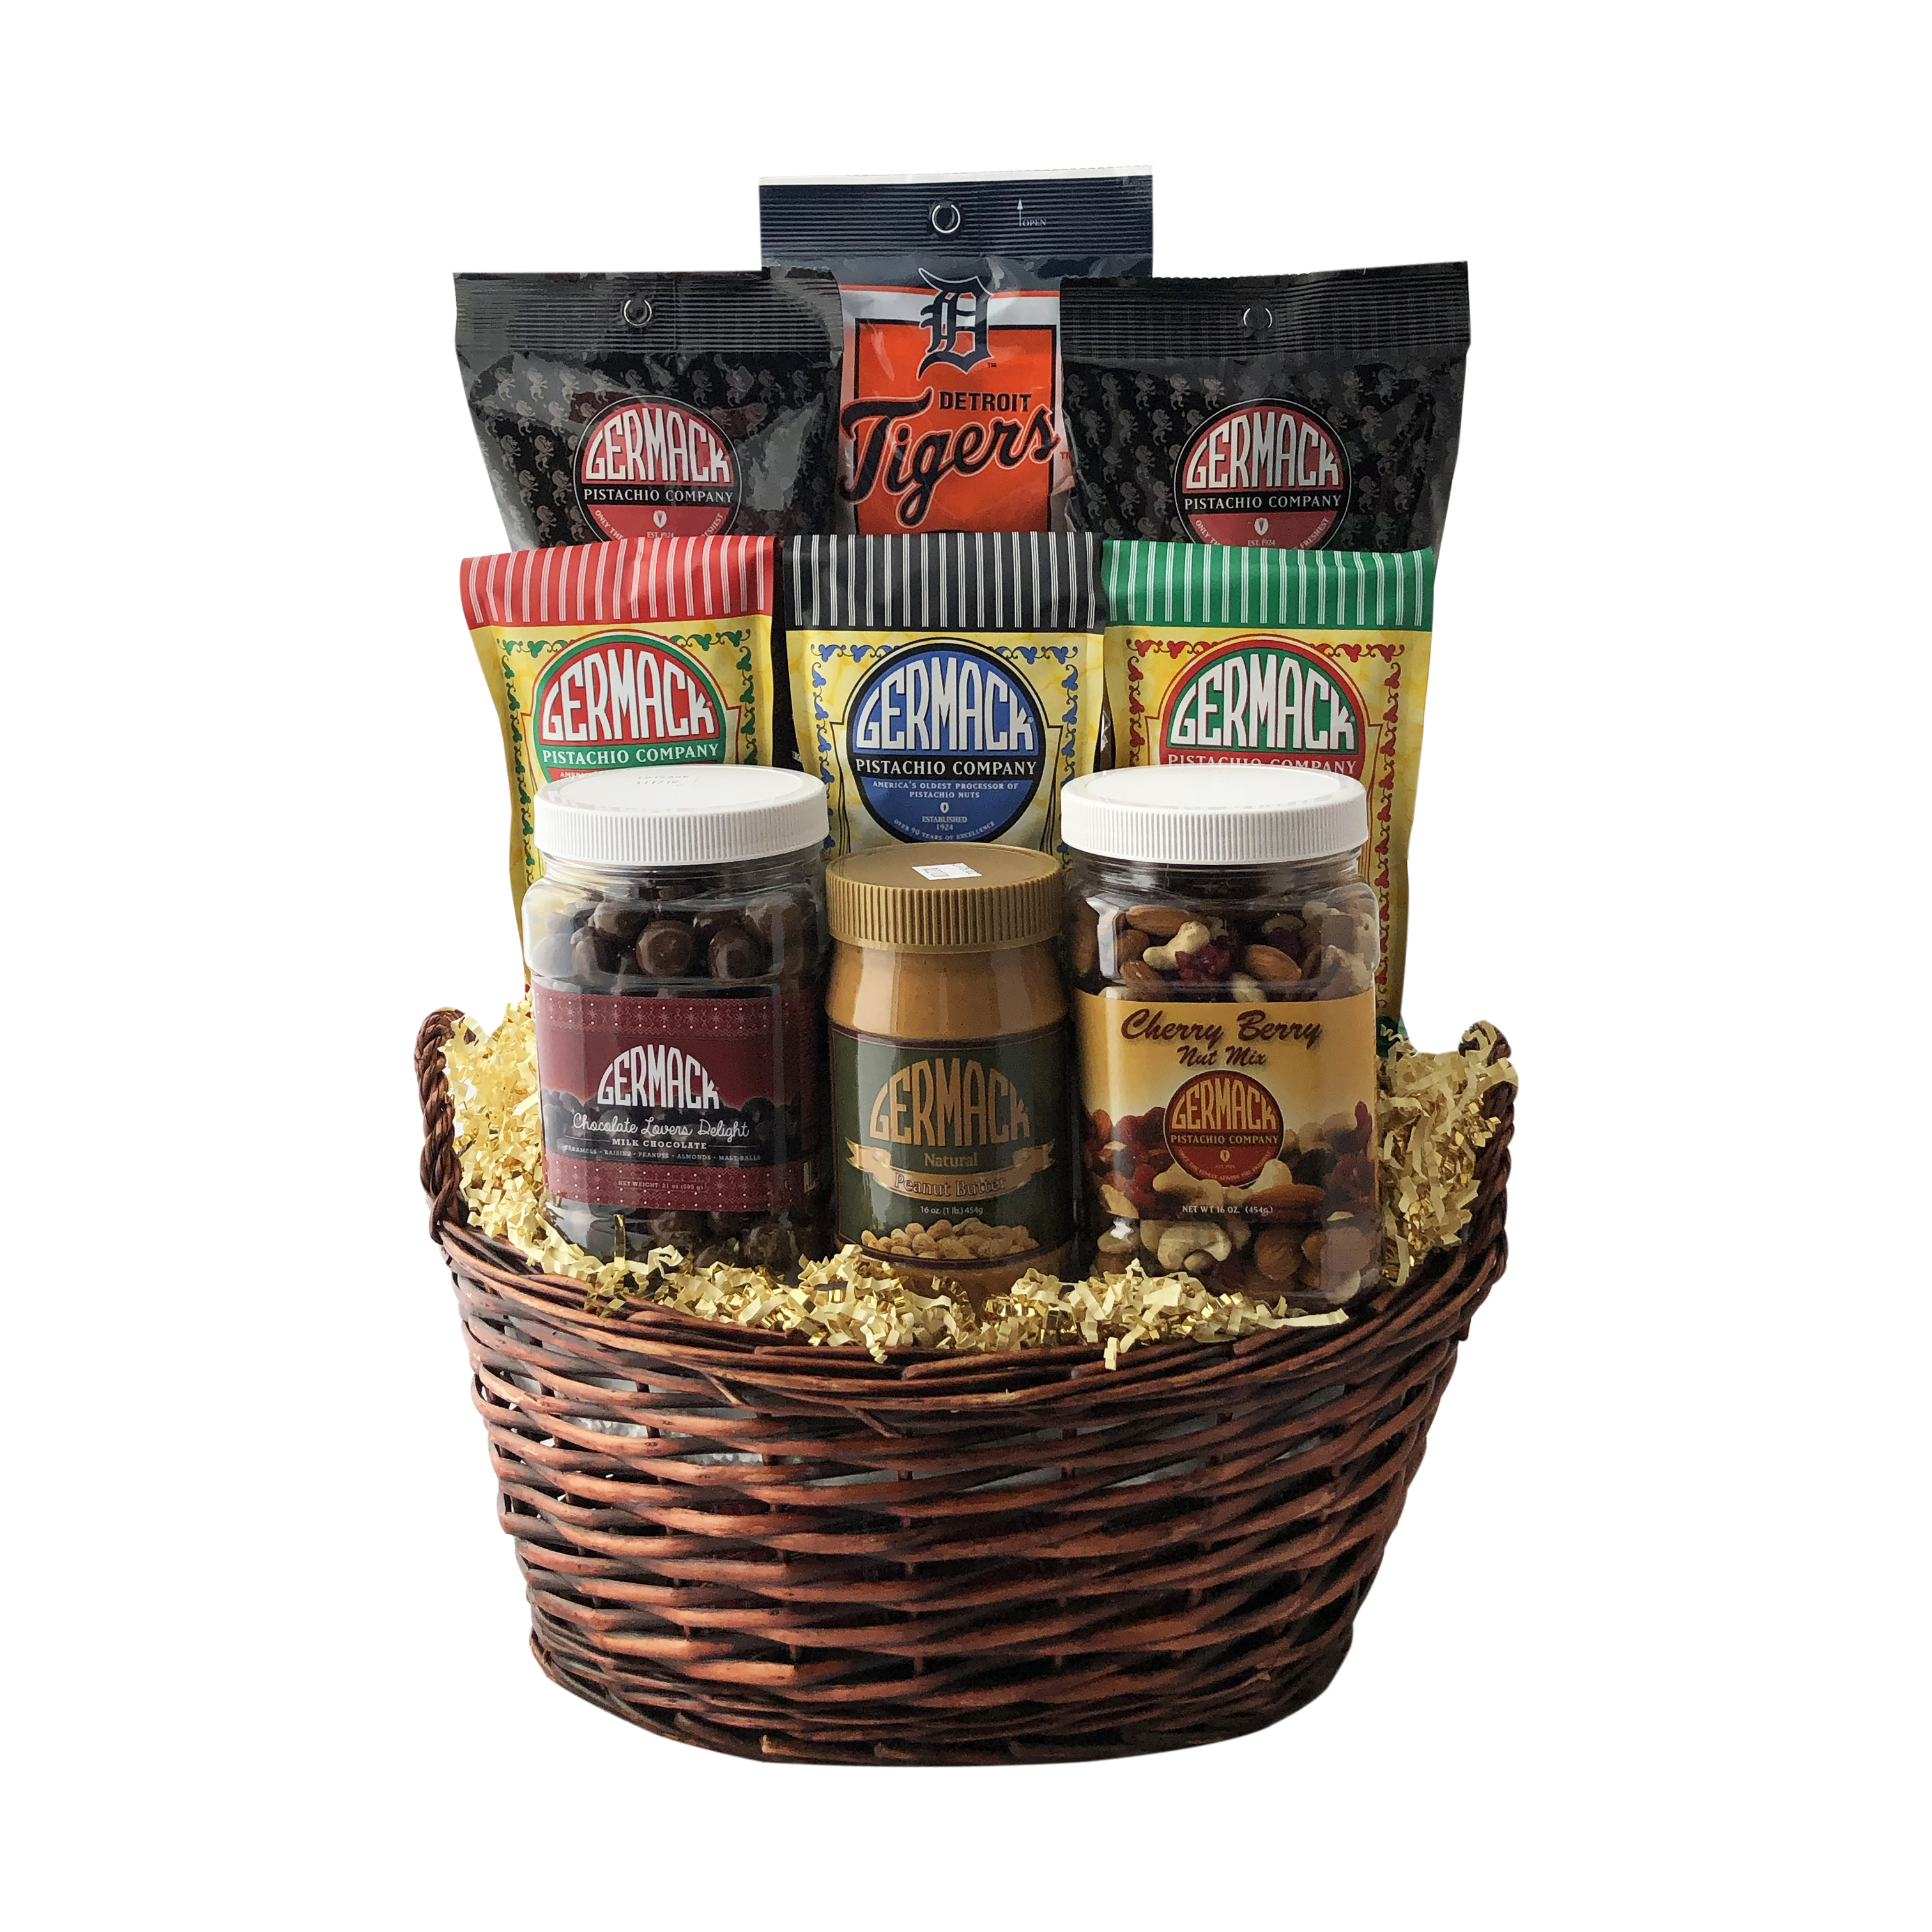 Picture Basket - Germack Gift Ultimate